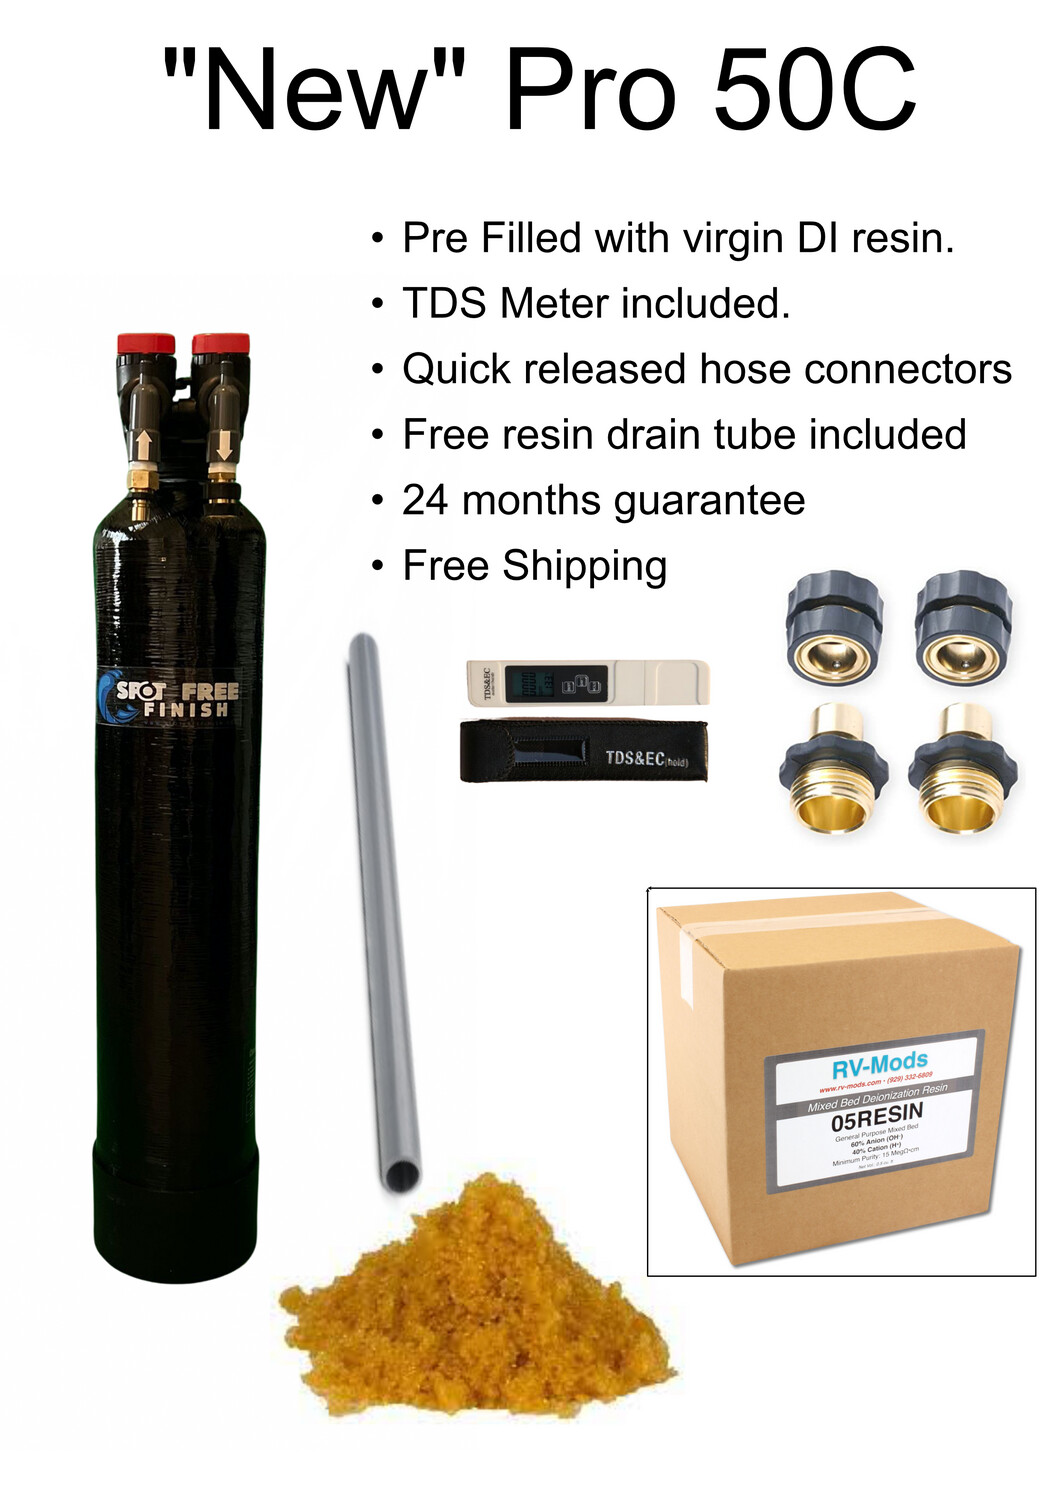 New Pro 50 Compact Spotfree DI system  CR Spotless water systems  conversion kit